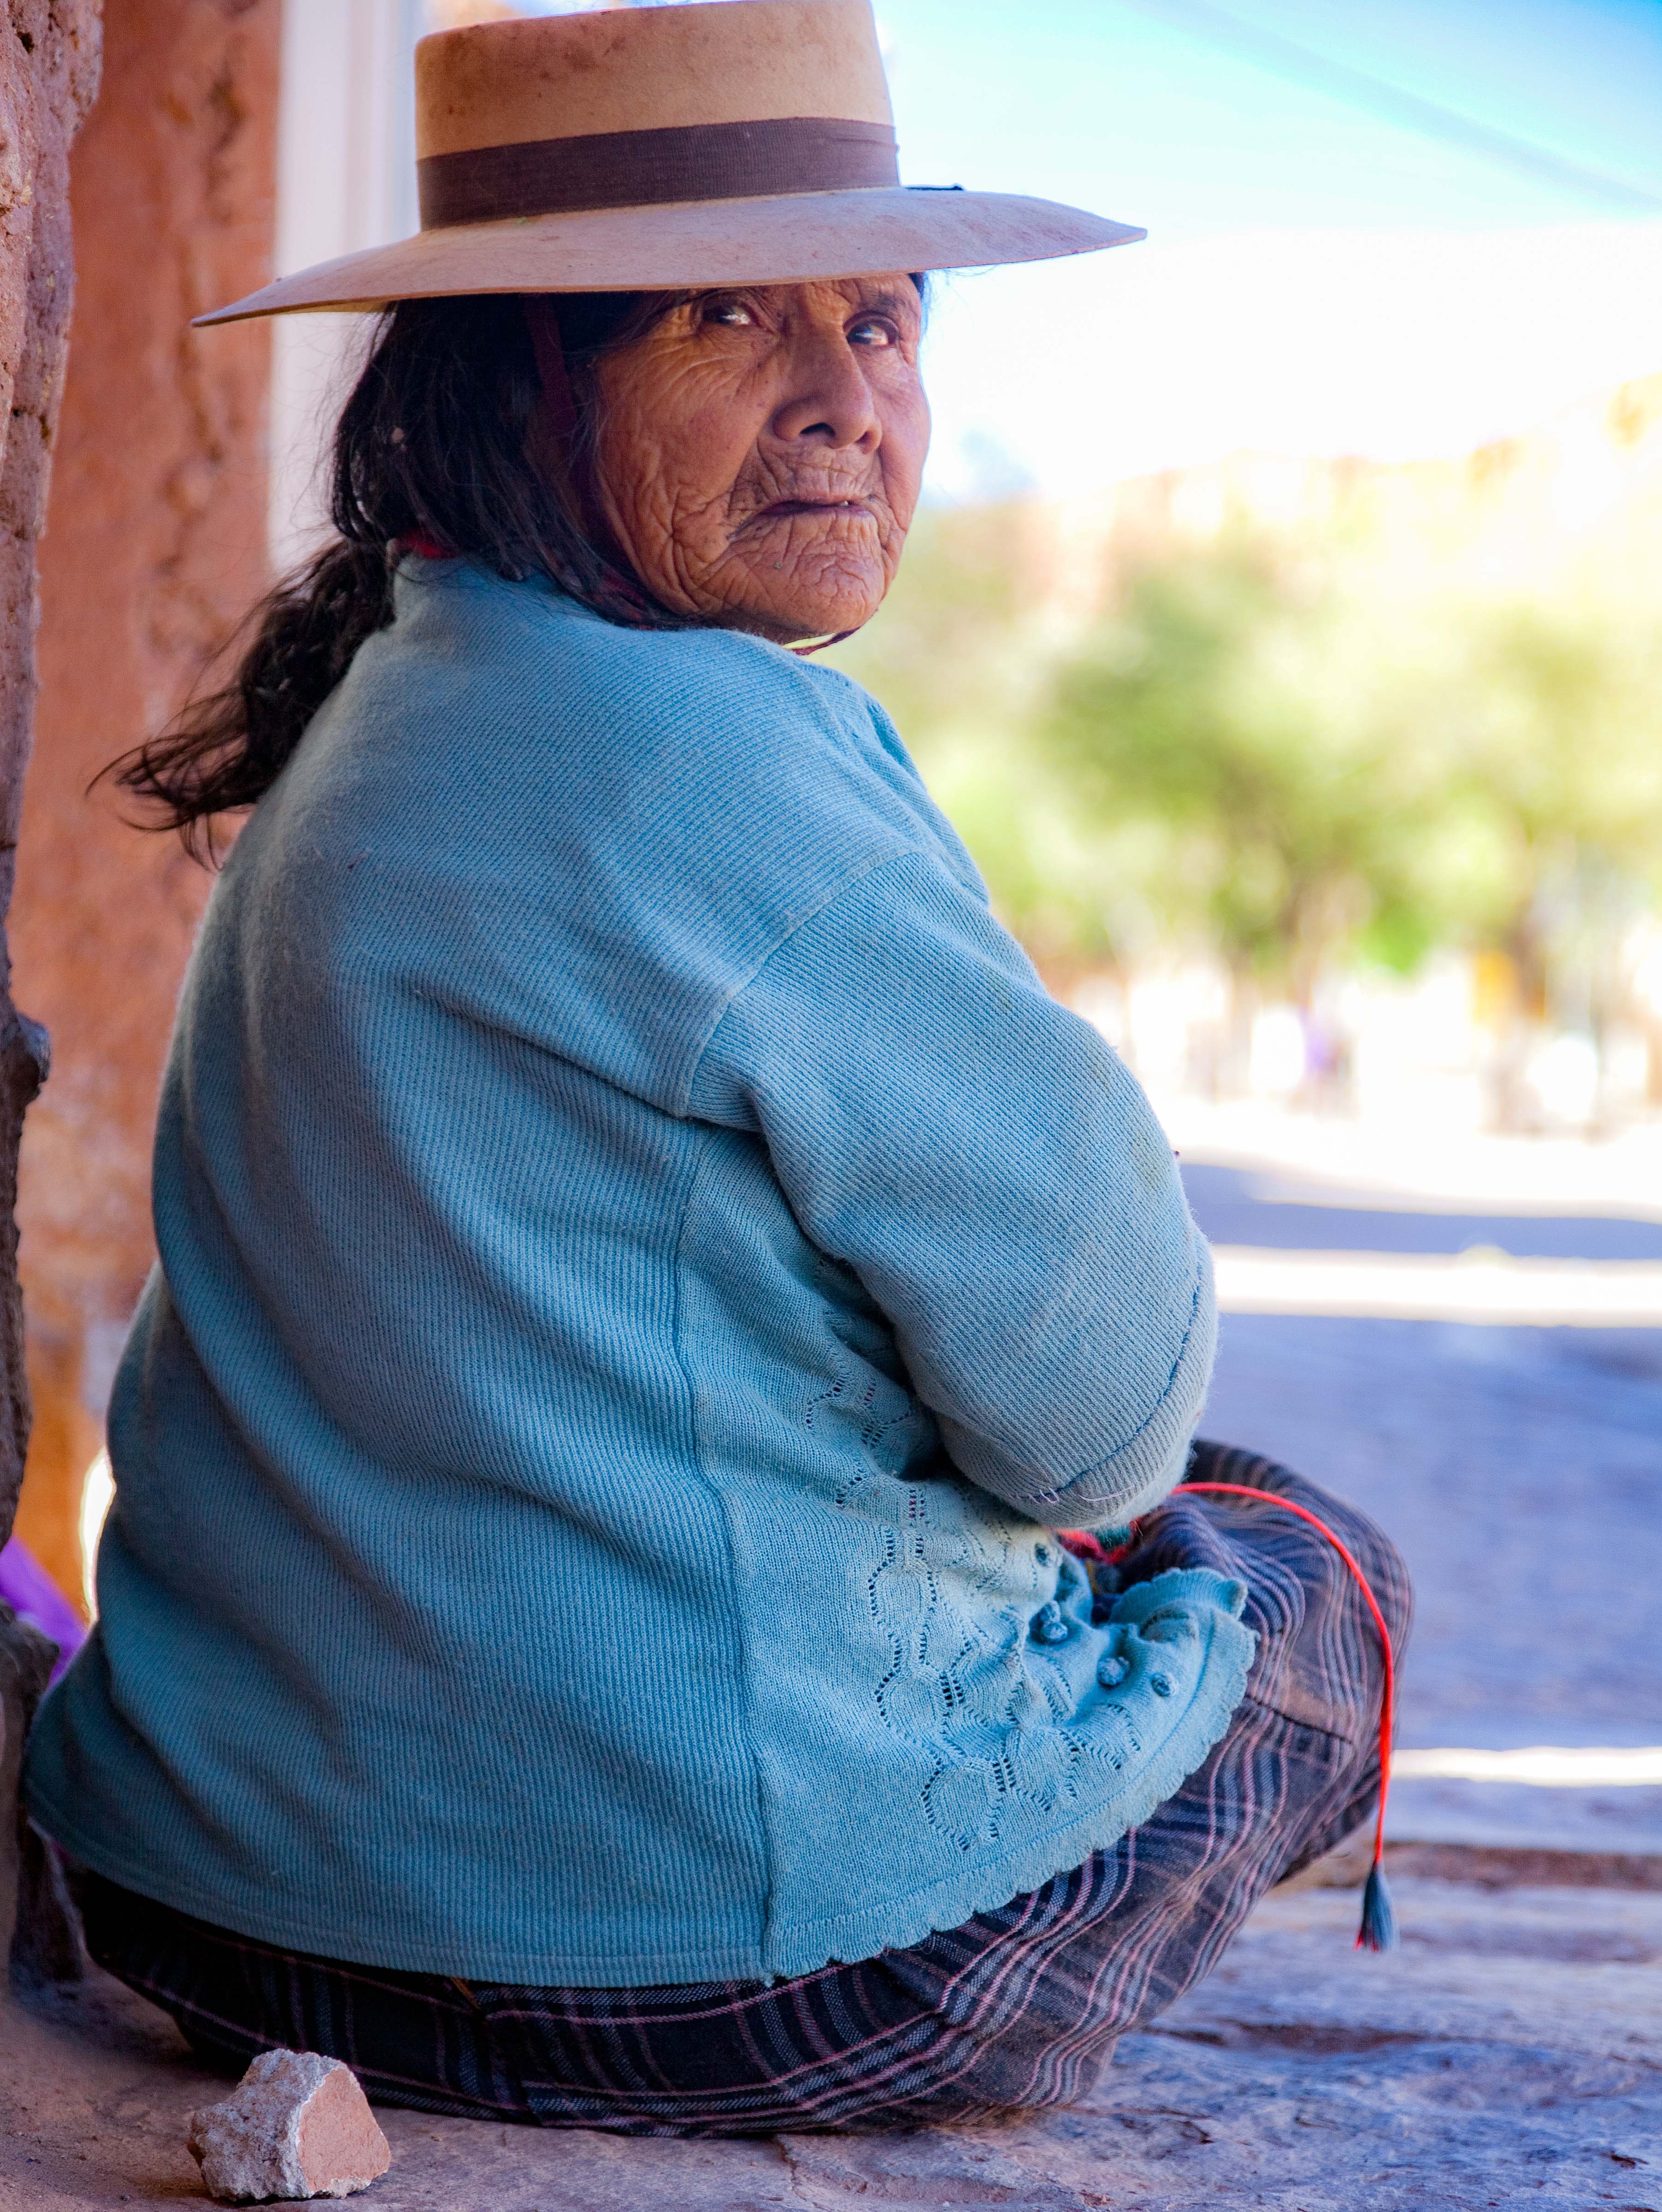 Argentina, Jujuy Prov, Susques Indian Woman, 2010, IMG 5053